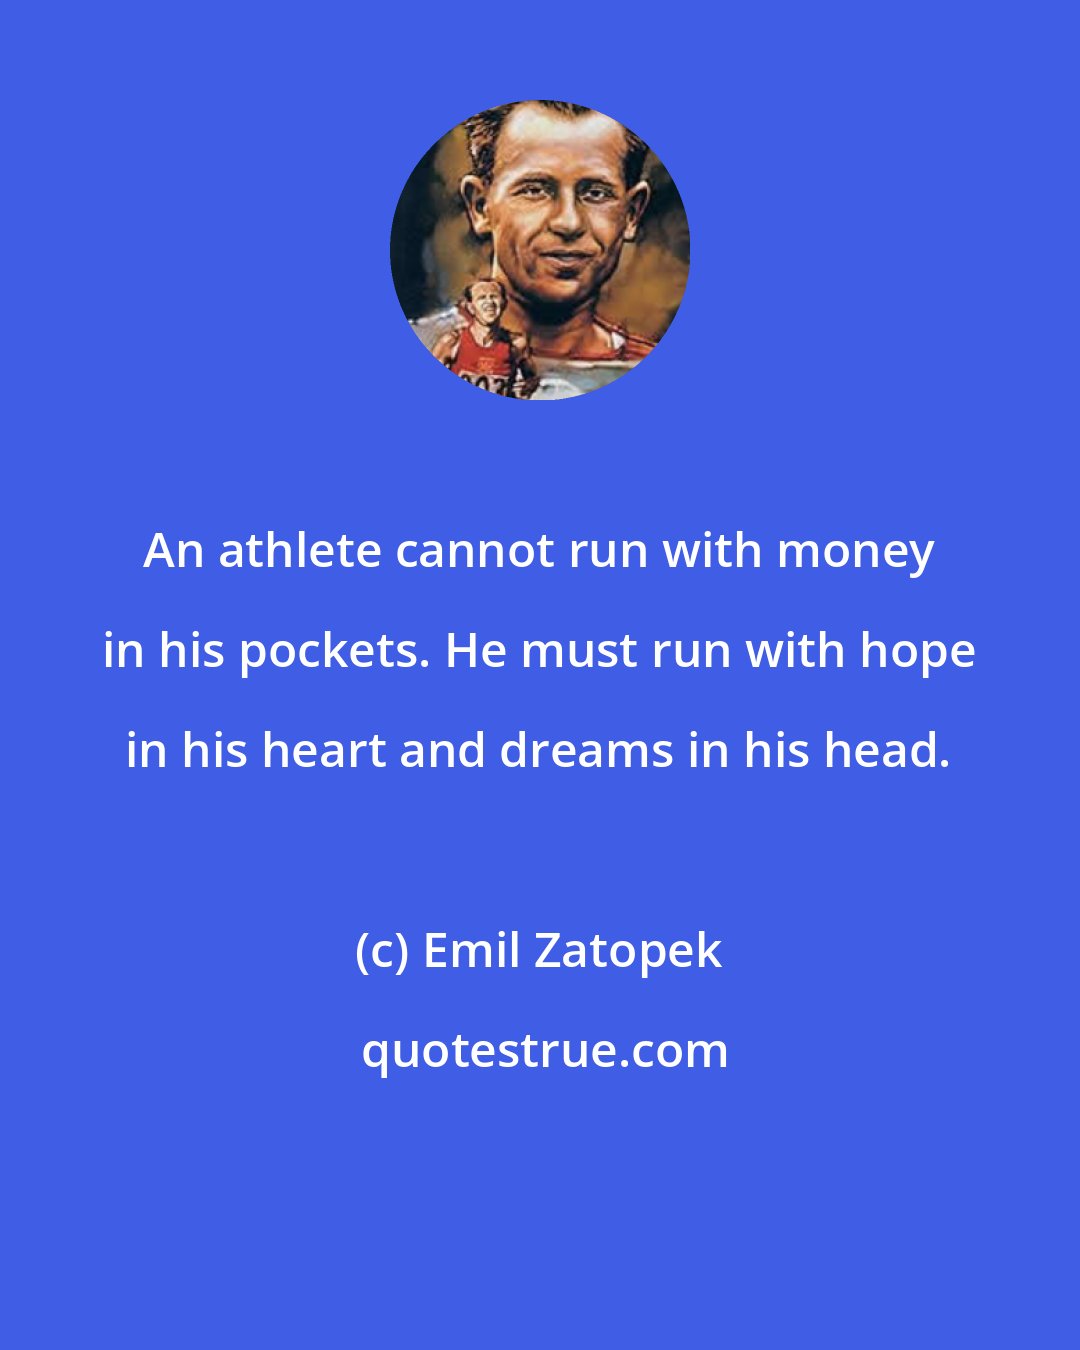 Emil Zatopek: An athlete cannot run with money in his pockets. He must run with hope in his heart and dreams in his head.